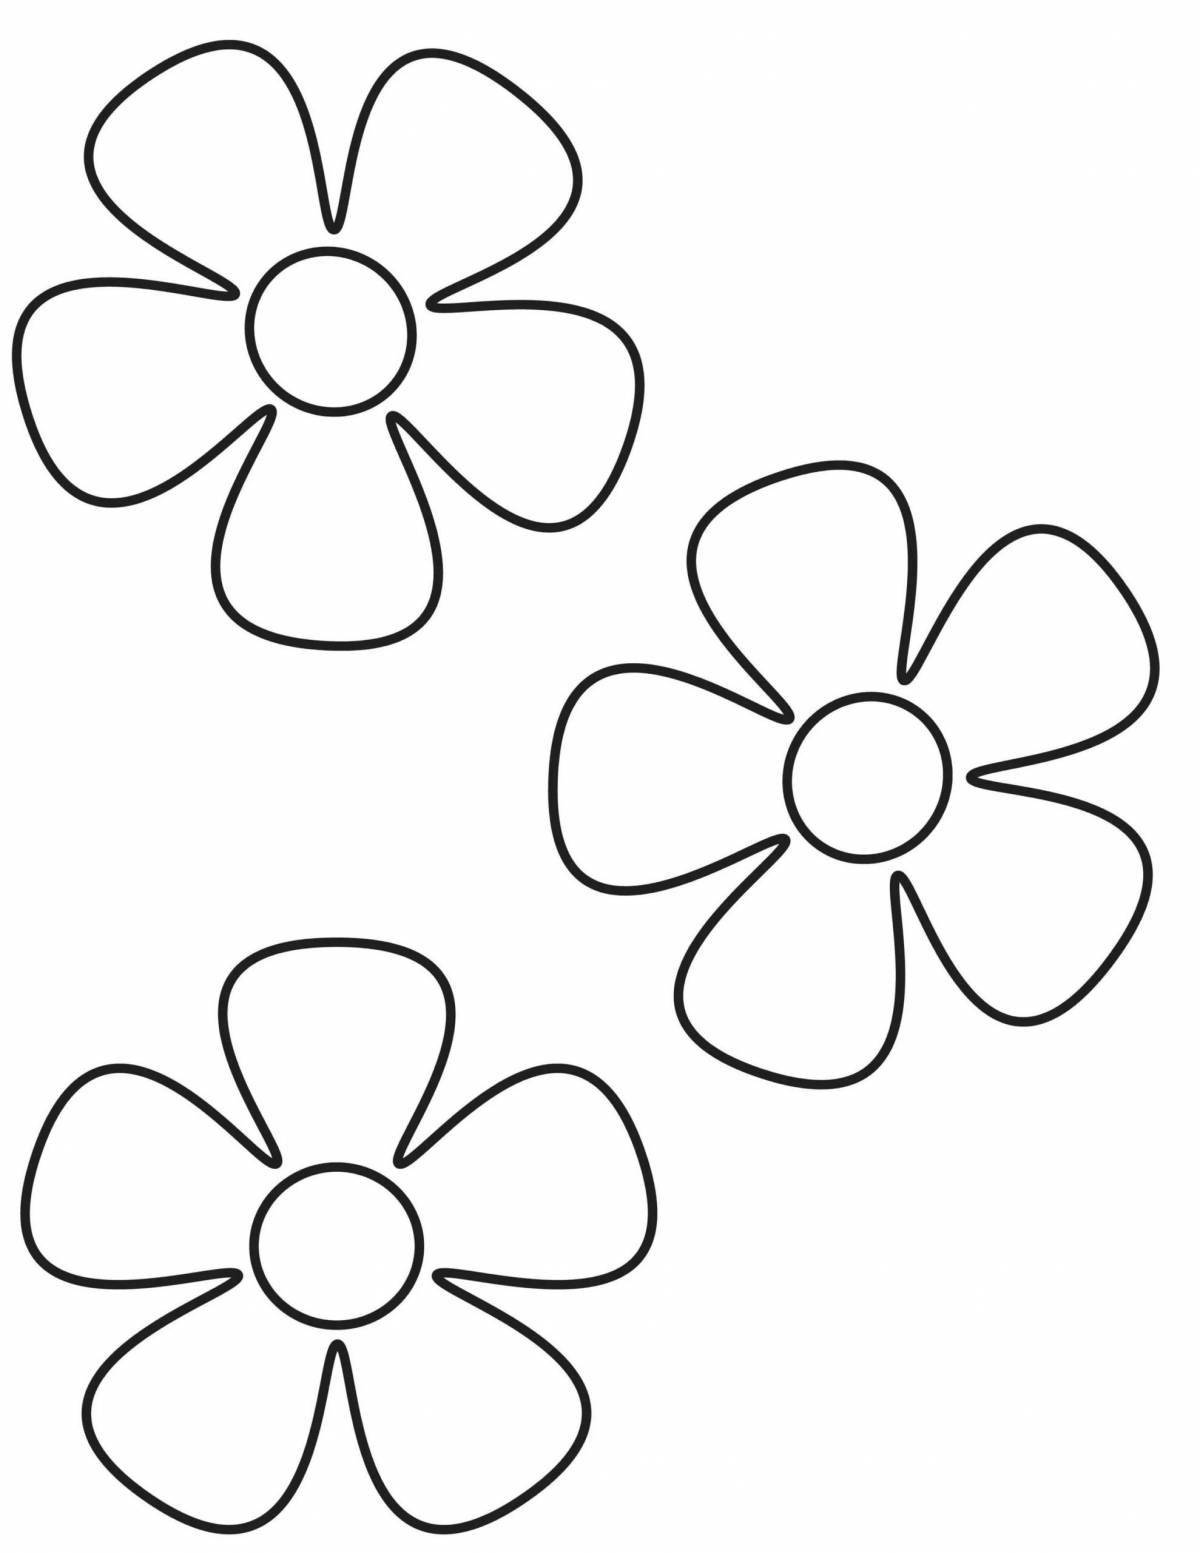 Cute coloring flower picture for kids